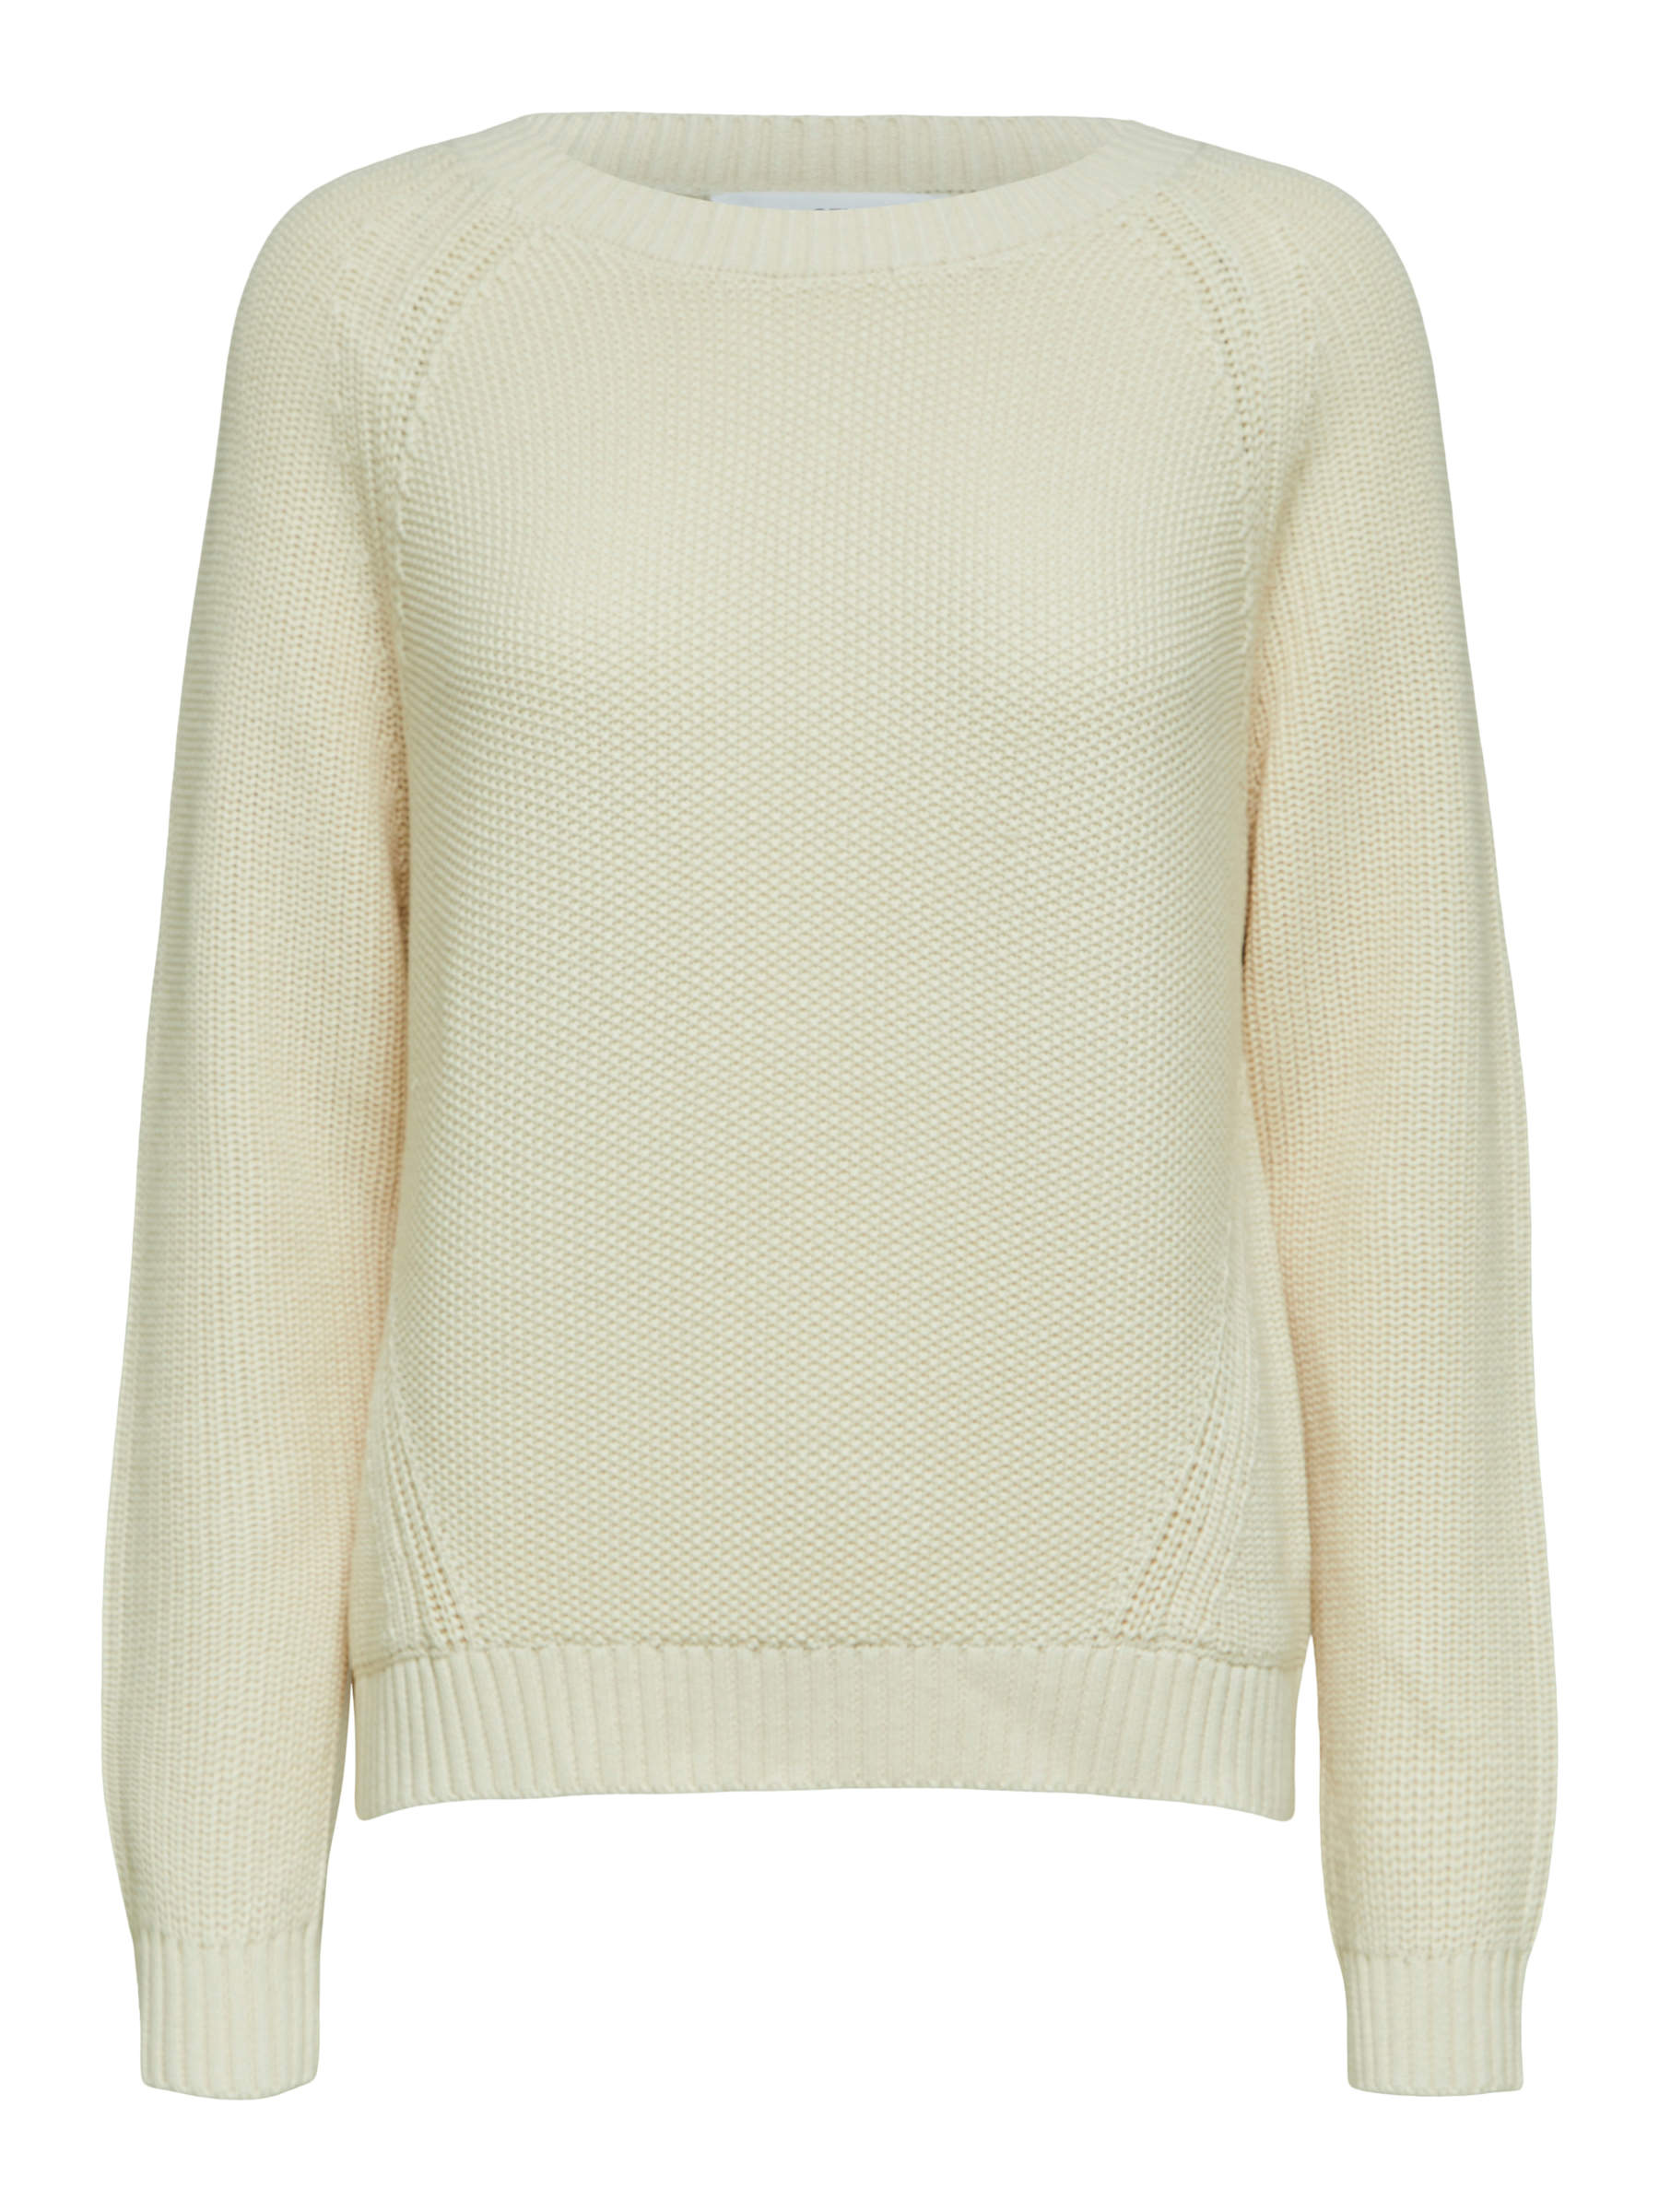 RELAXED FIT KNITTED JUMPER | Beige | SELECTED FEMME®